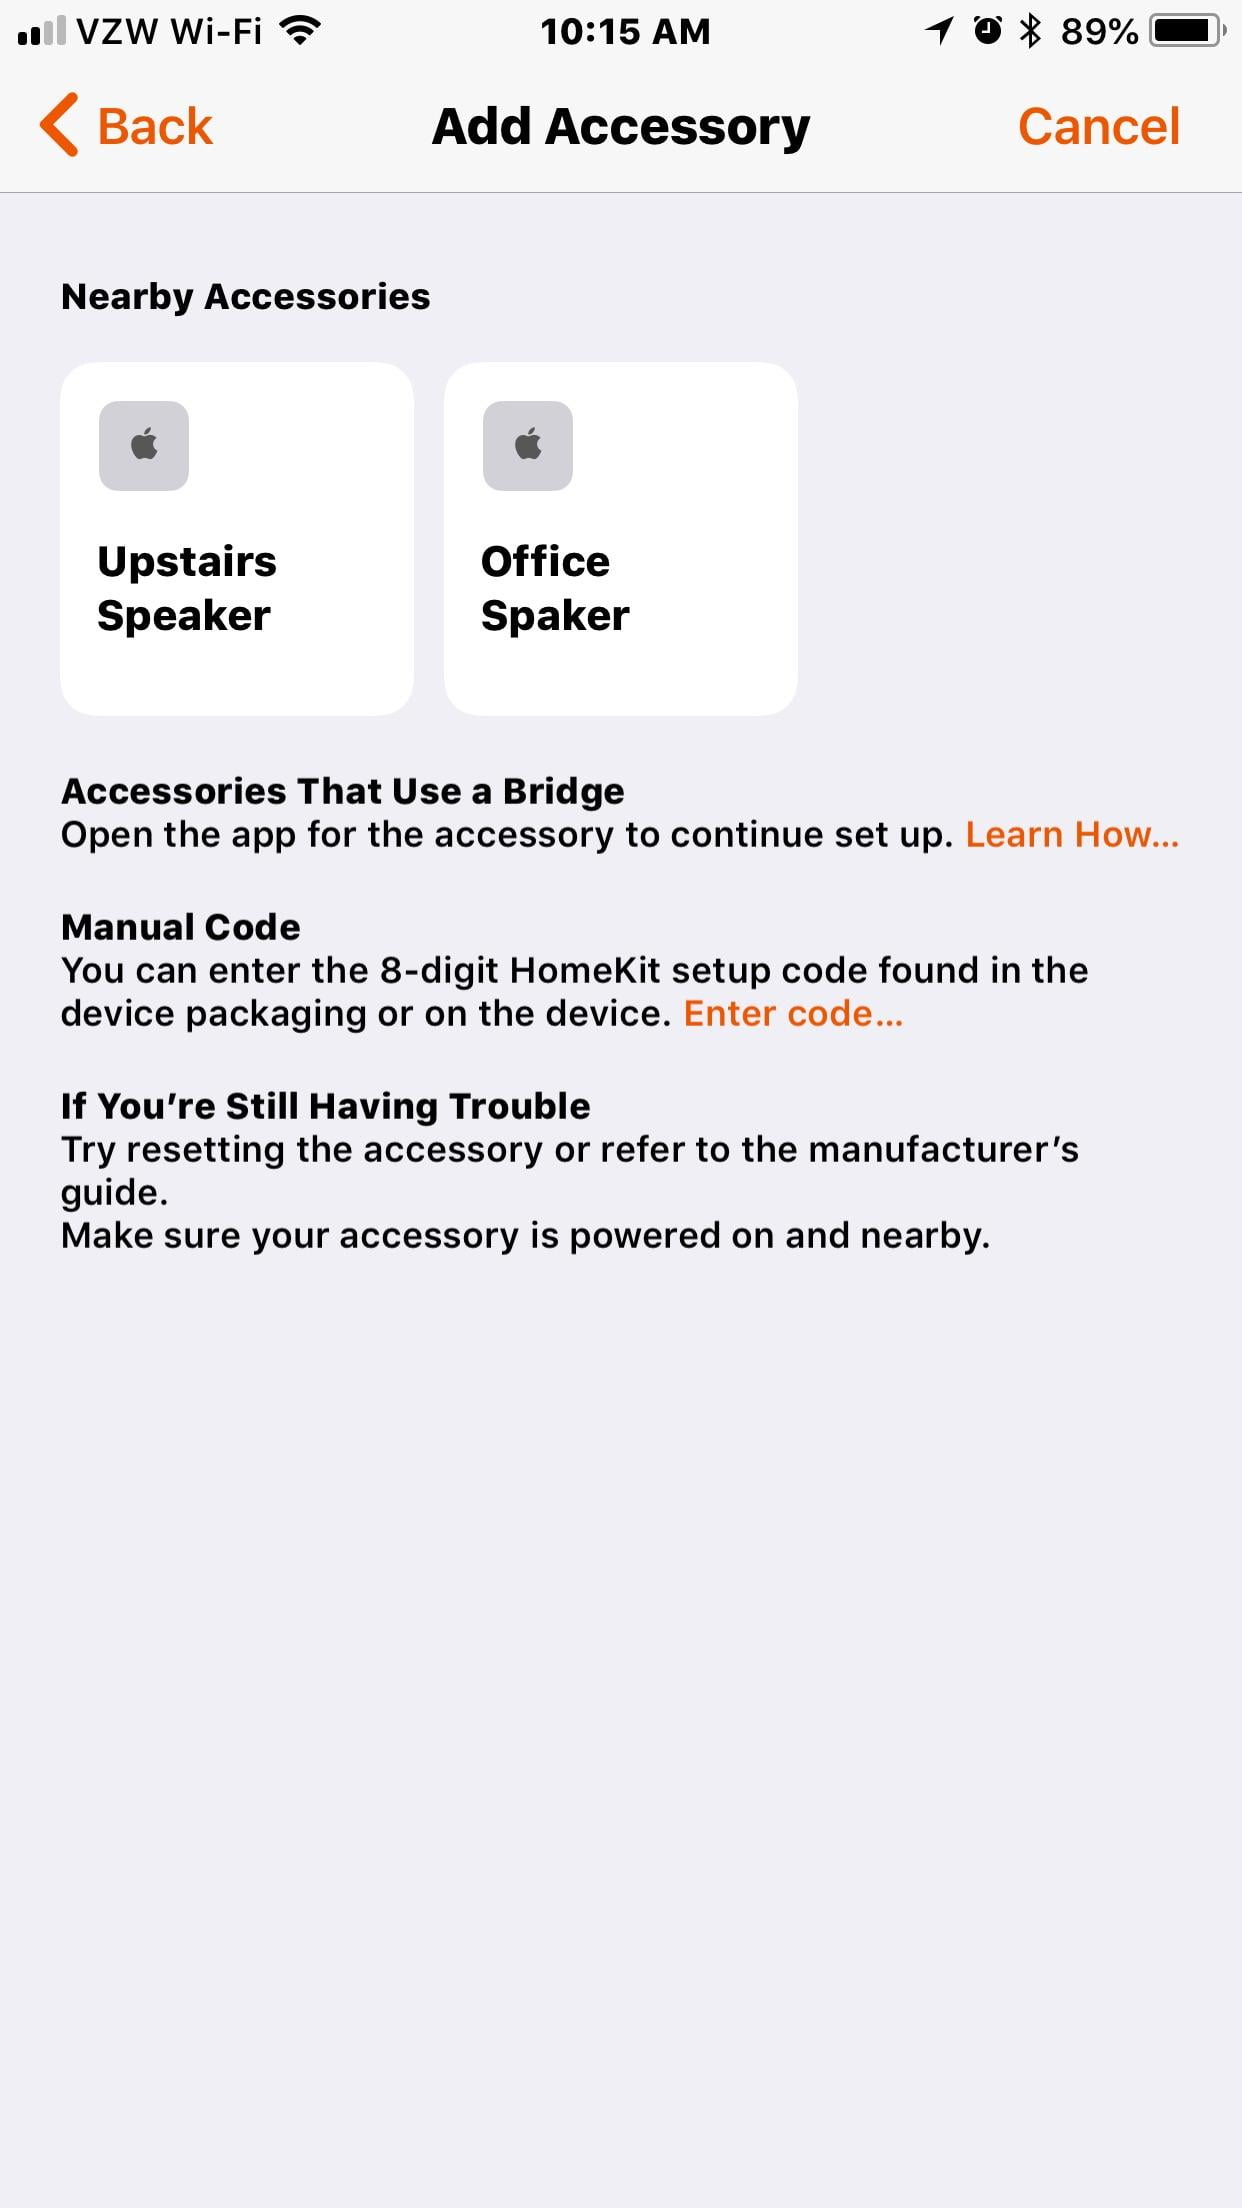 AirPort Express featured as HomeKit accessory in iOS 11.4 beta